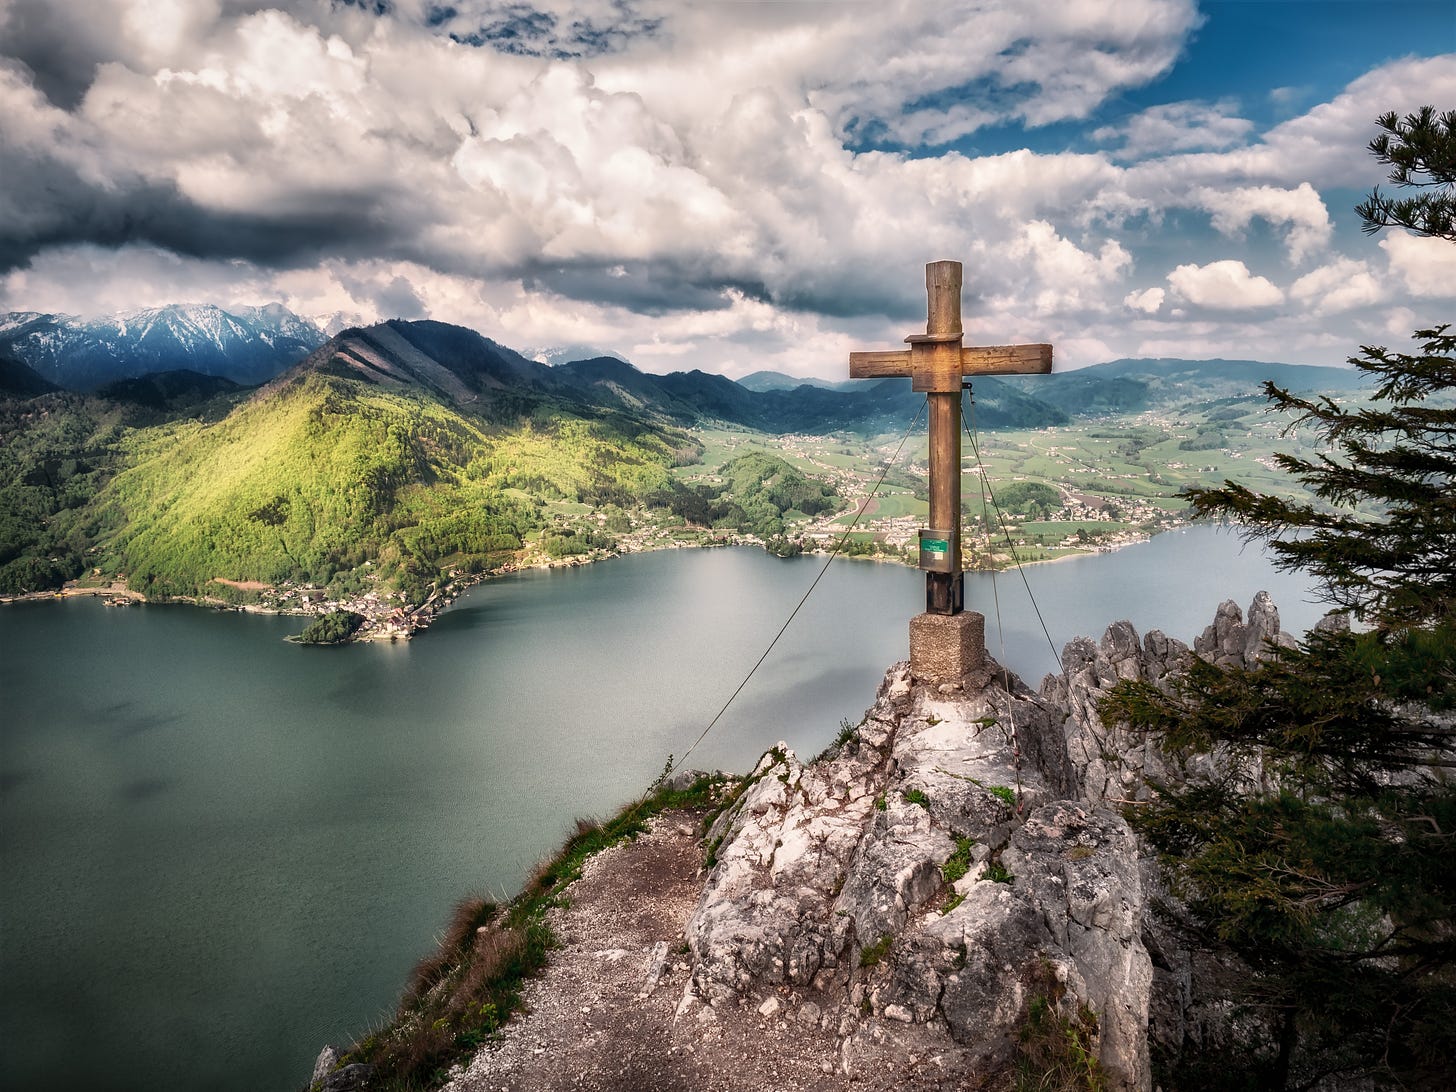 A cross on a mountain with rolling hills and a lake in the background.